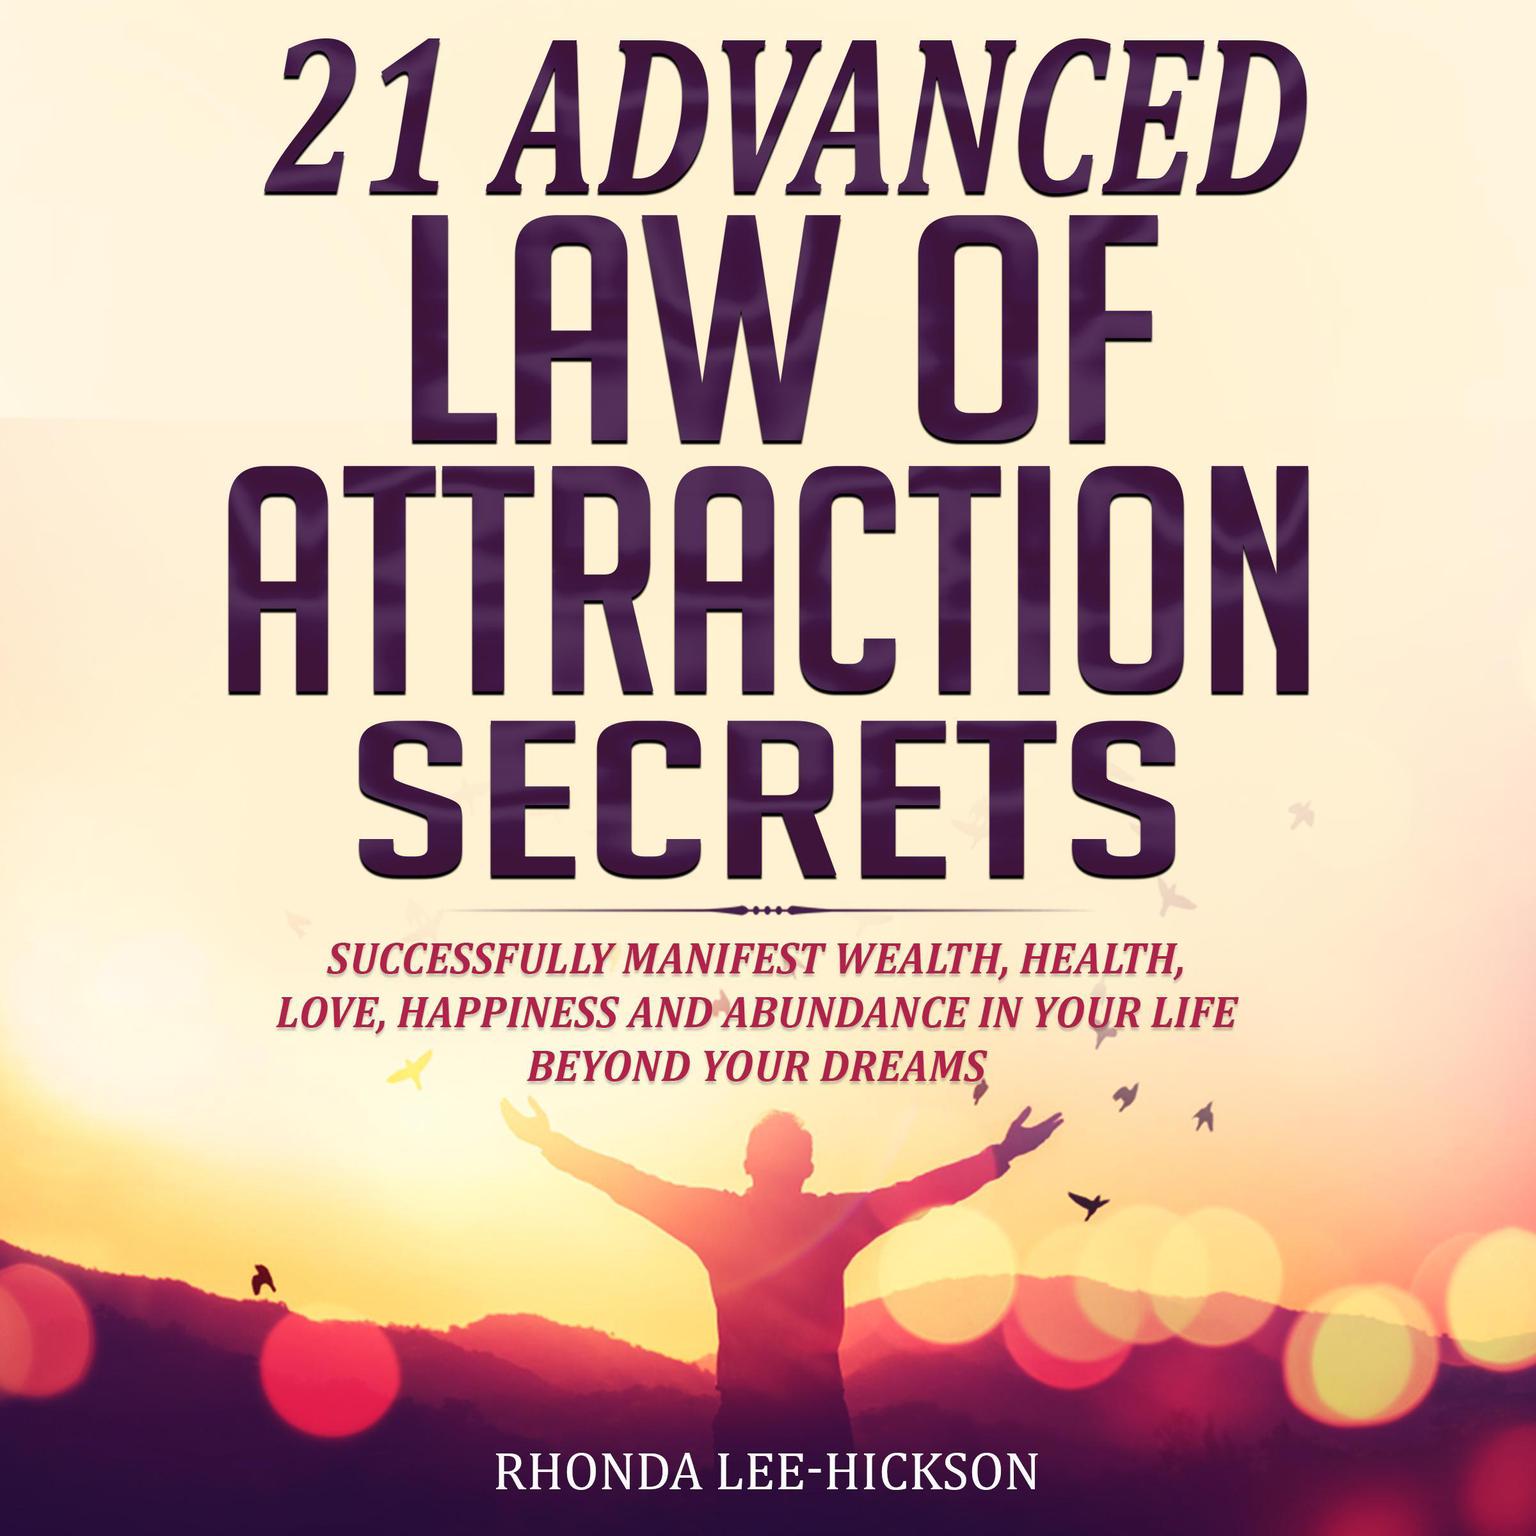 21 Advanced Law of Attraction Secrets: Successfully Manifest Wealth, Health, Love, Happiness and Abundance In Your Life Beyond Your Dreams Audiobook, by Rhonda Lee-Hickson